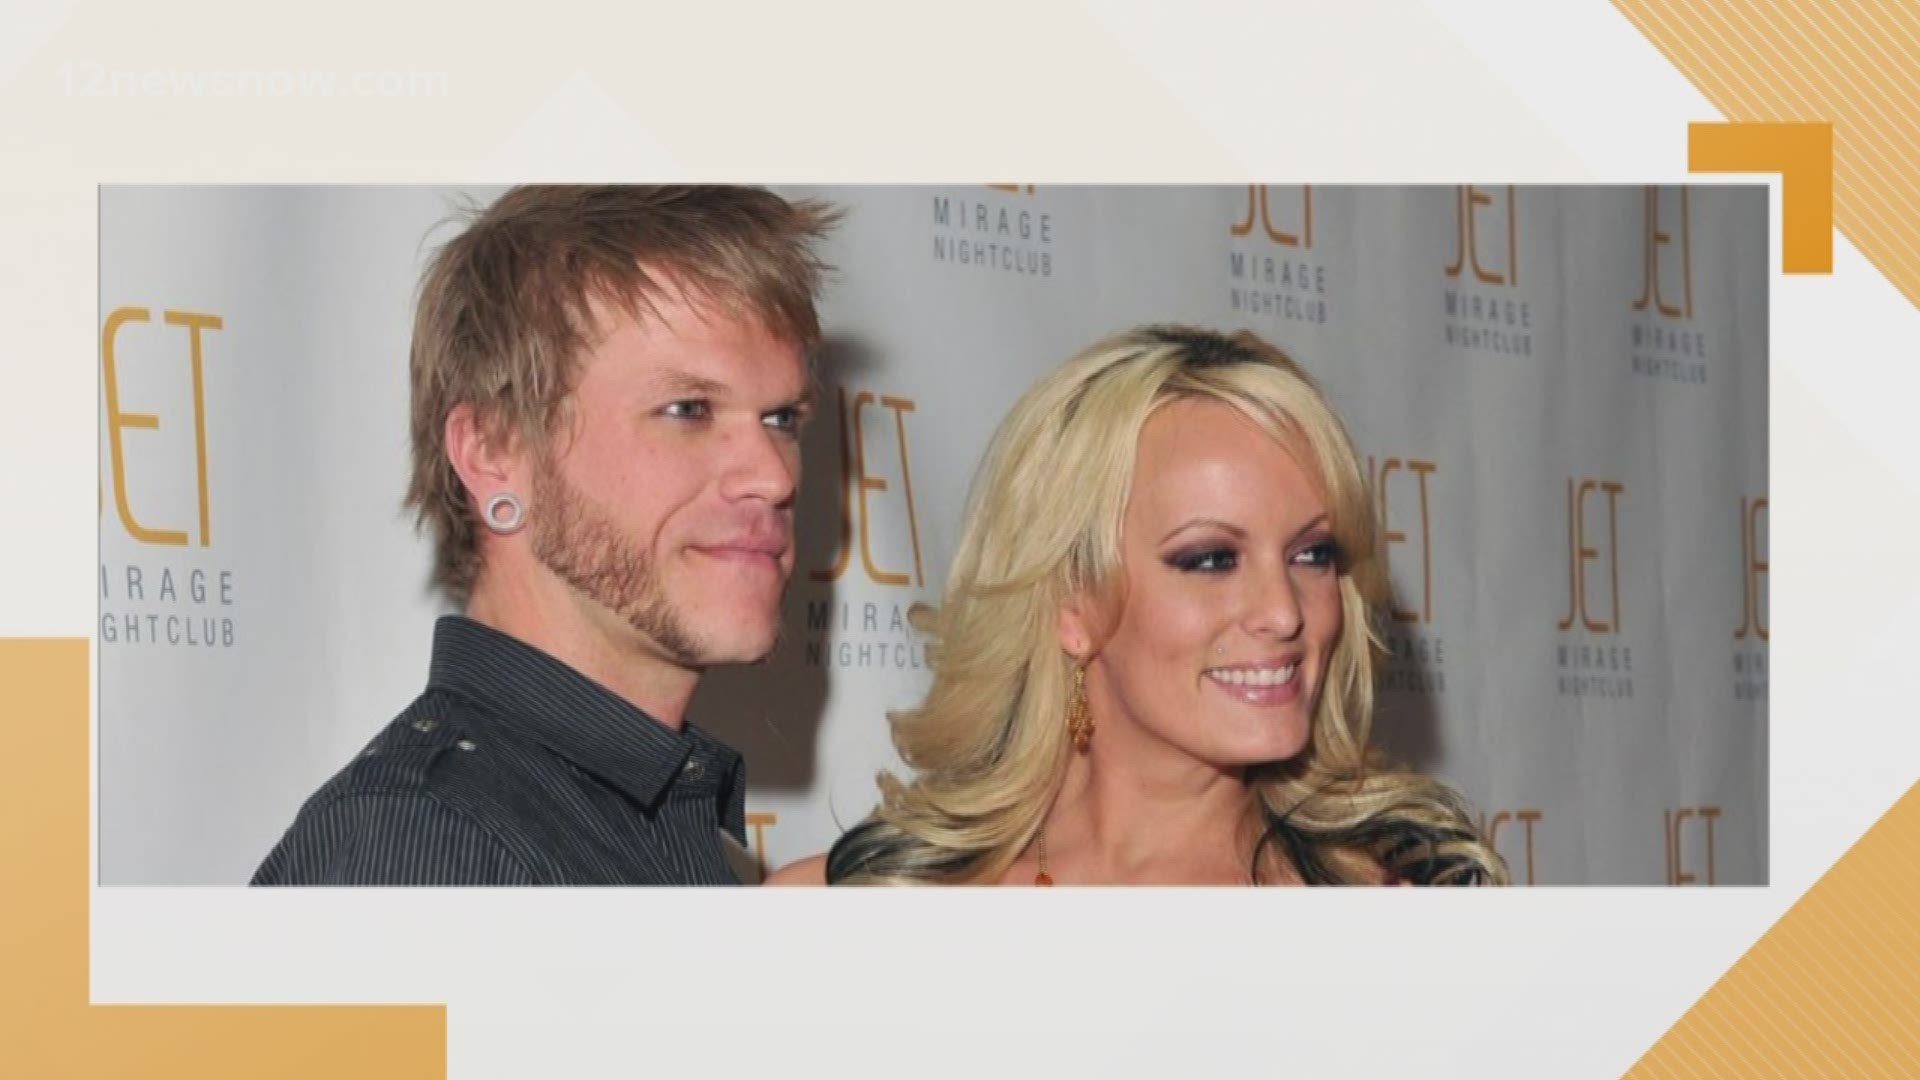 Stormy Daniels' husband has filed a petition for divorce for adultery. Daniels' attorney says that the divorce was mutual.